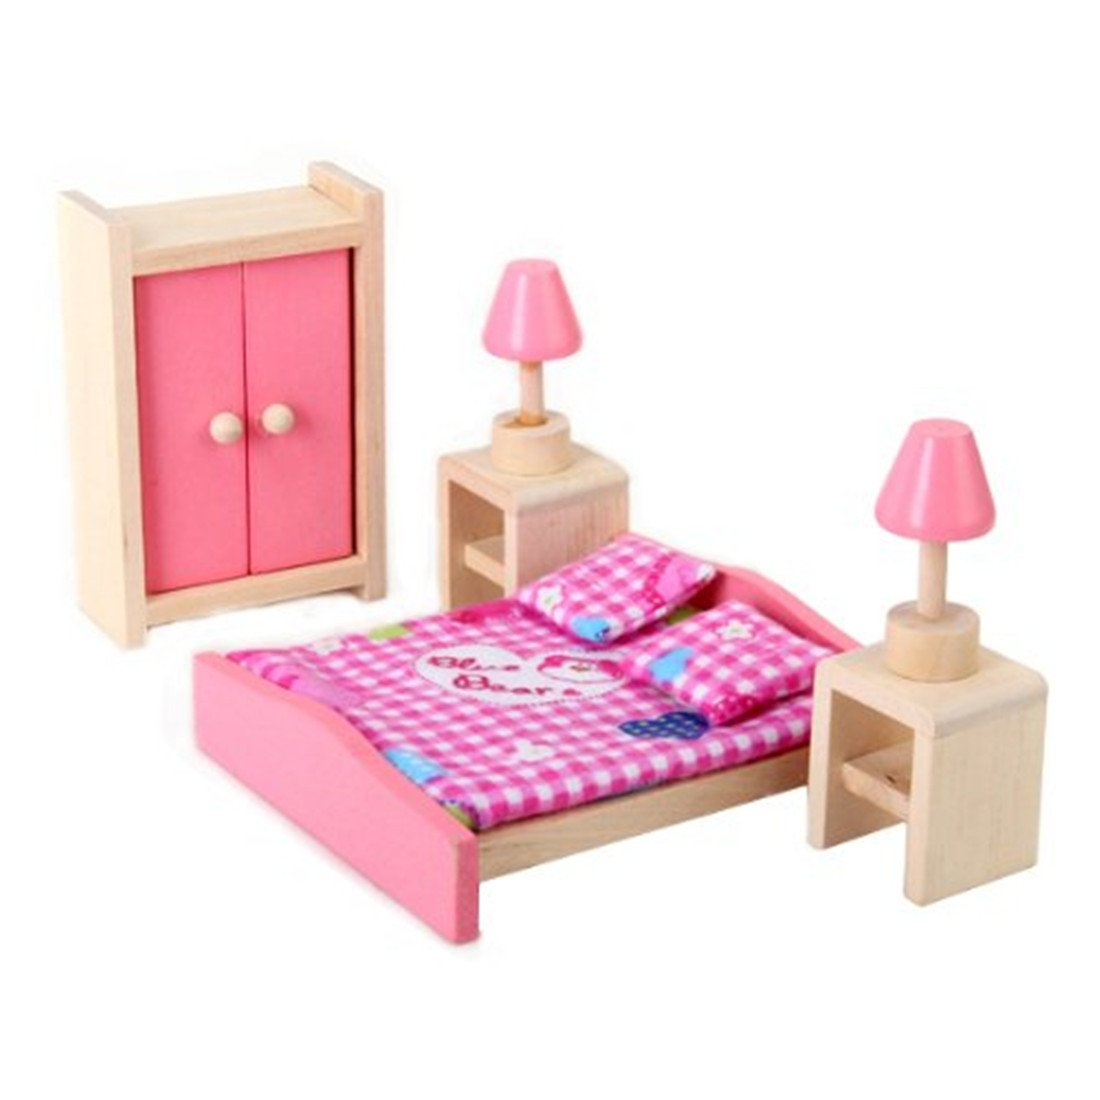 Details About Mini Children Wooden Doll House Furniture Kids Bedroom T8u8 in sizing 1100 X 1100